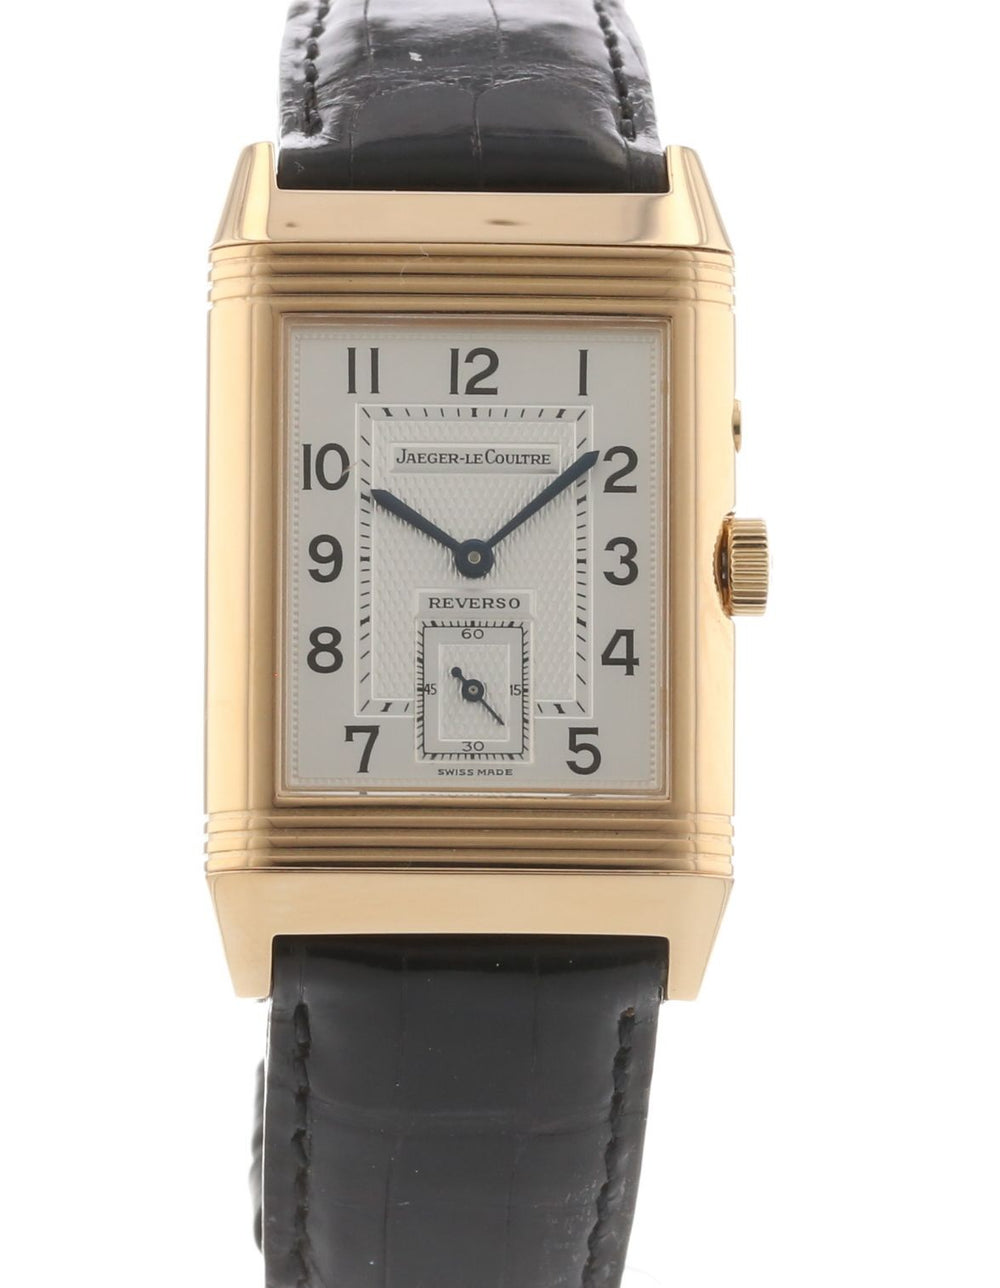 Jaeger-LeCoultre Reverso Duo 270.2.54 1